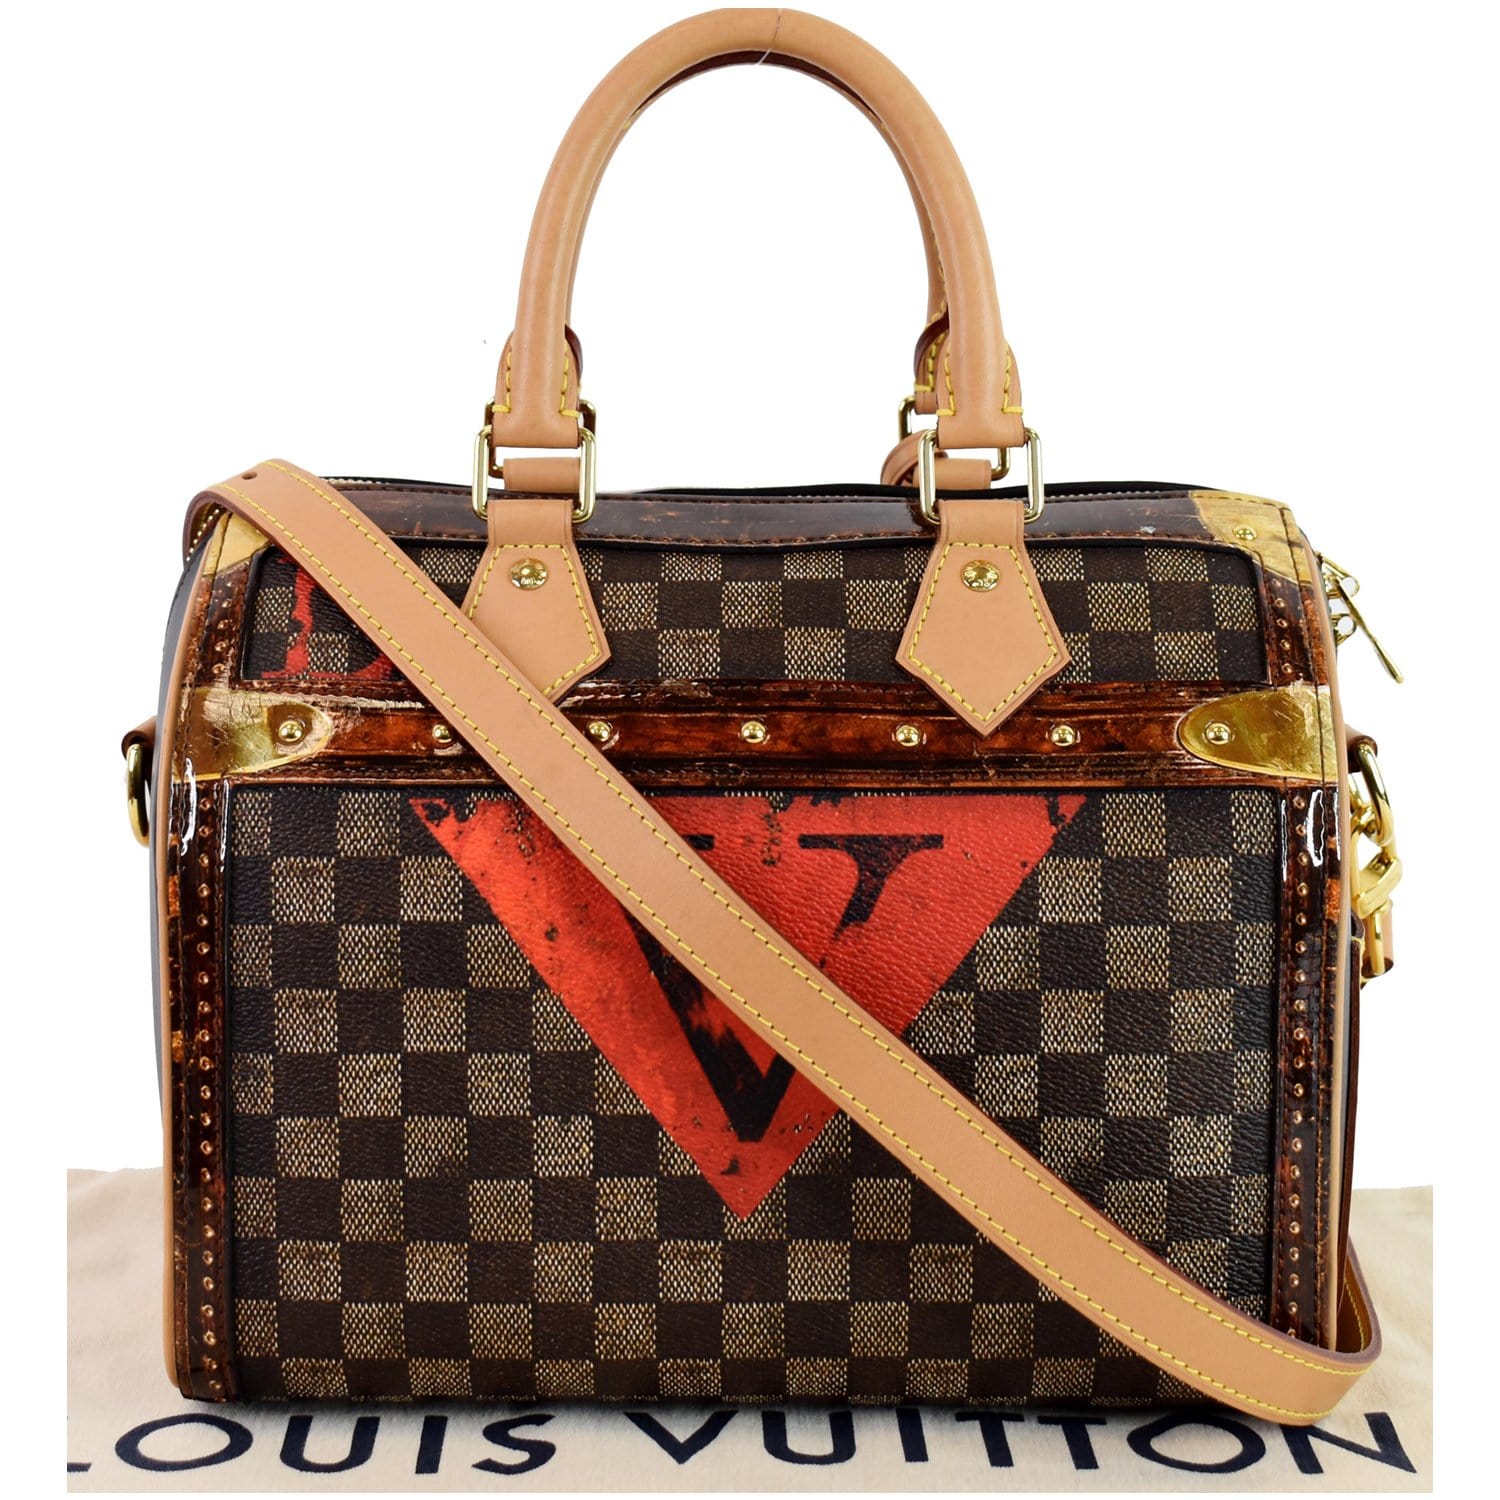 A Step Back In Louis Vuitton Time